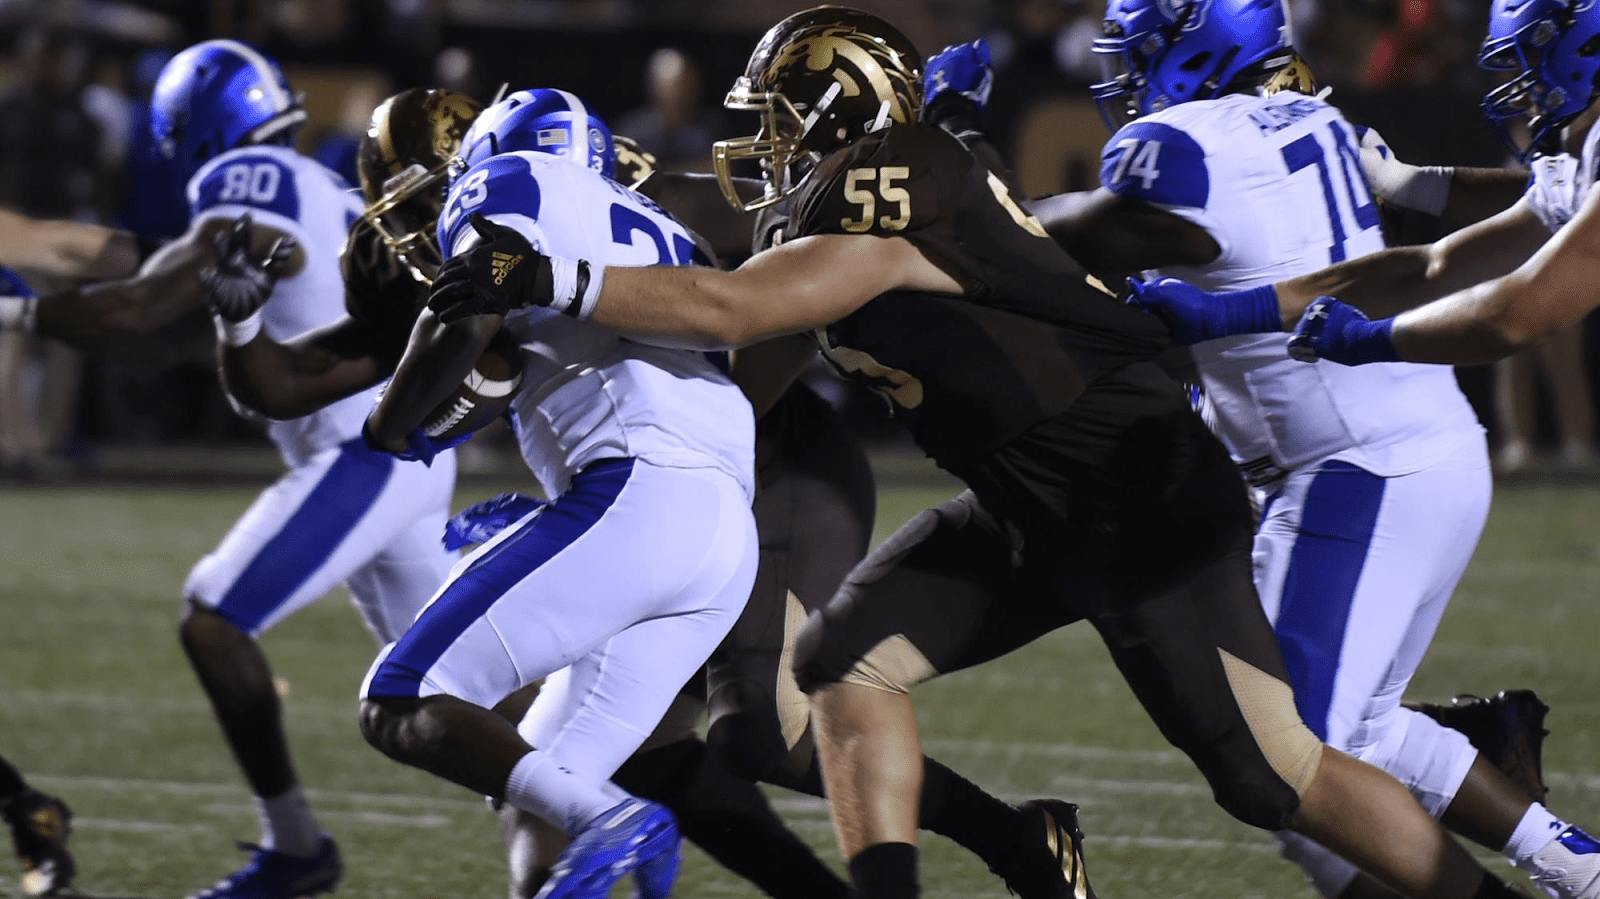 Braden Fiske is a strong, versatile member of Western Michigan's defensive line. Hula Bowl scout Jake Kernen breaks down Fiske's strengths and weaknesses in this article.